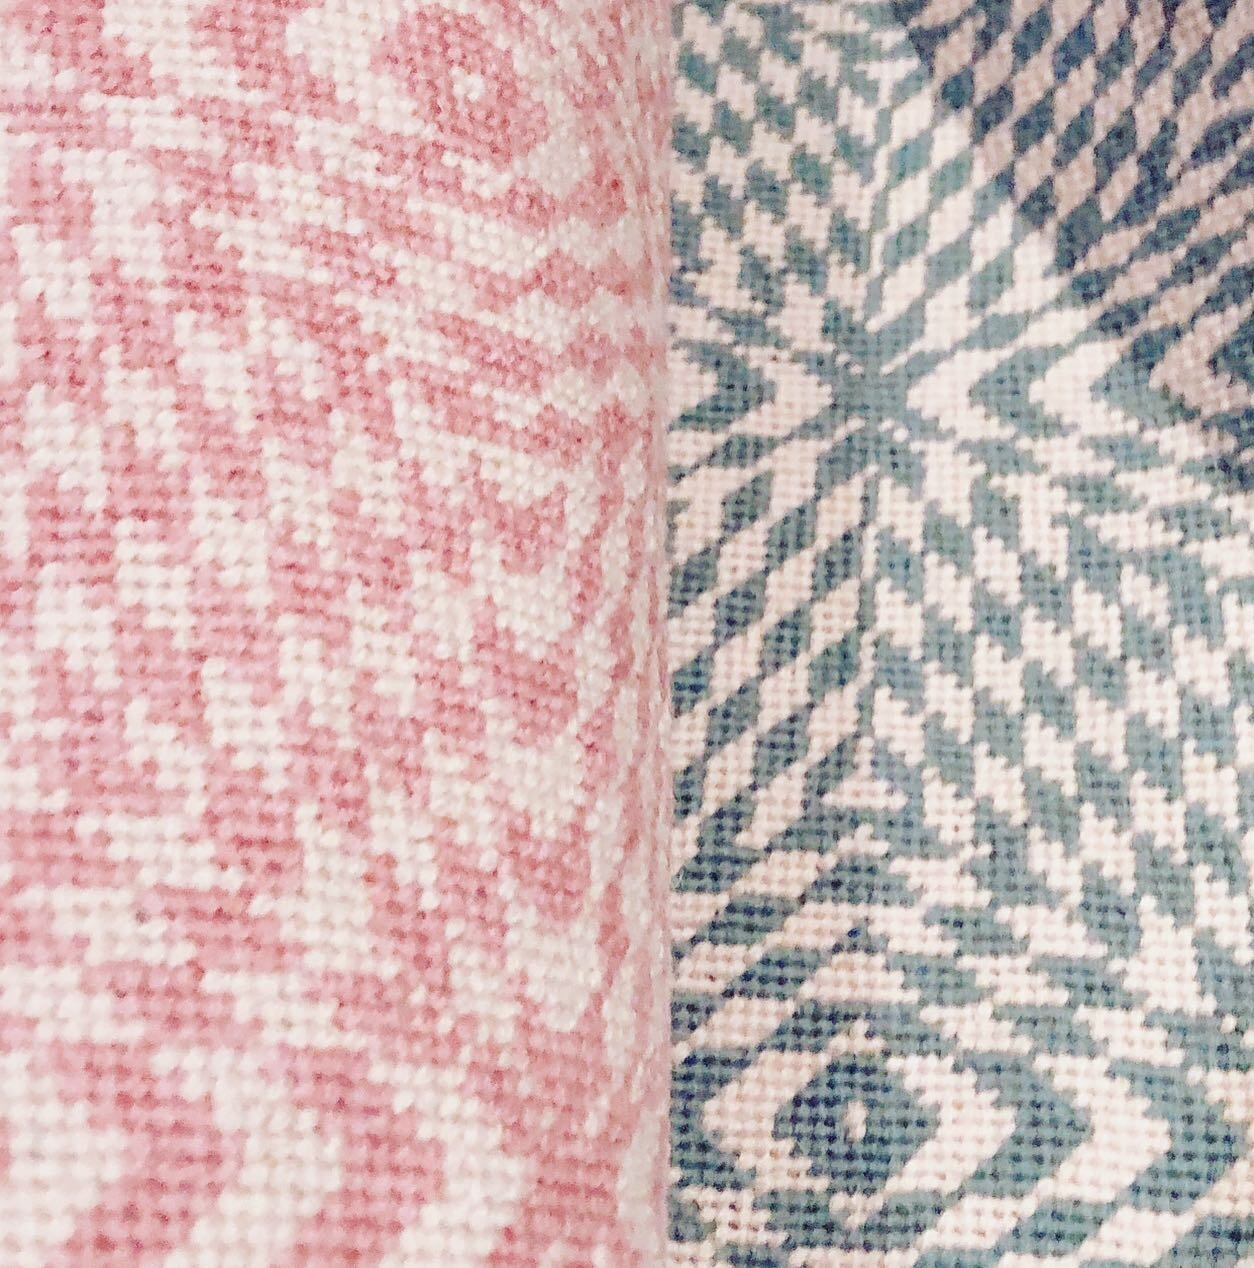 Two little bedroom pillows in the making for siblings. Same geometric design, in our &lsquo;Margot Scarf&rsquo;, but stitched in different wool palettes: a very pale, bluey green and a classic pink. Their initials have been stitched in one of the cor